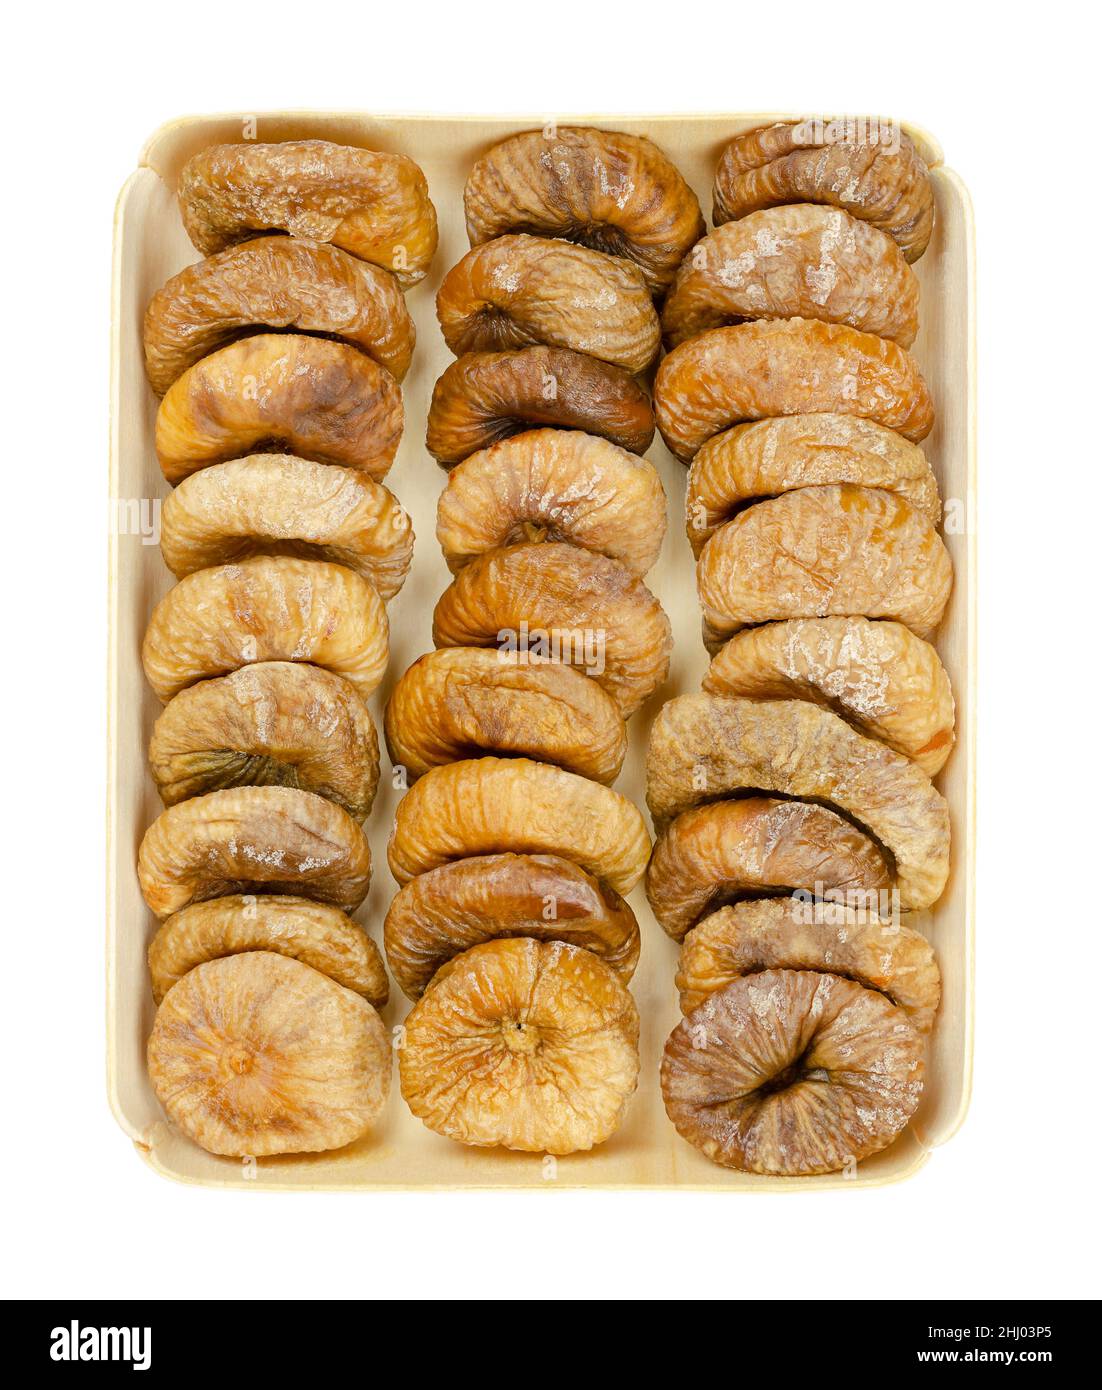 Sun dried figs, in a wooden tray. Three rows of dried, ripe and whole common figs, uncooked fruits of Ficus carica, a popular snack in wintertime. Stock Photo